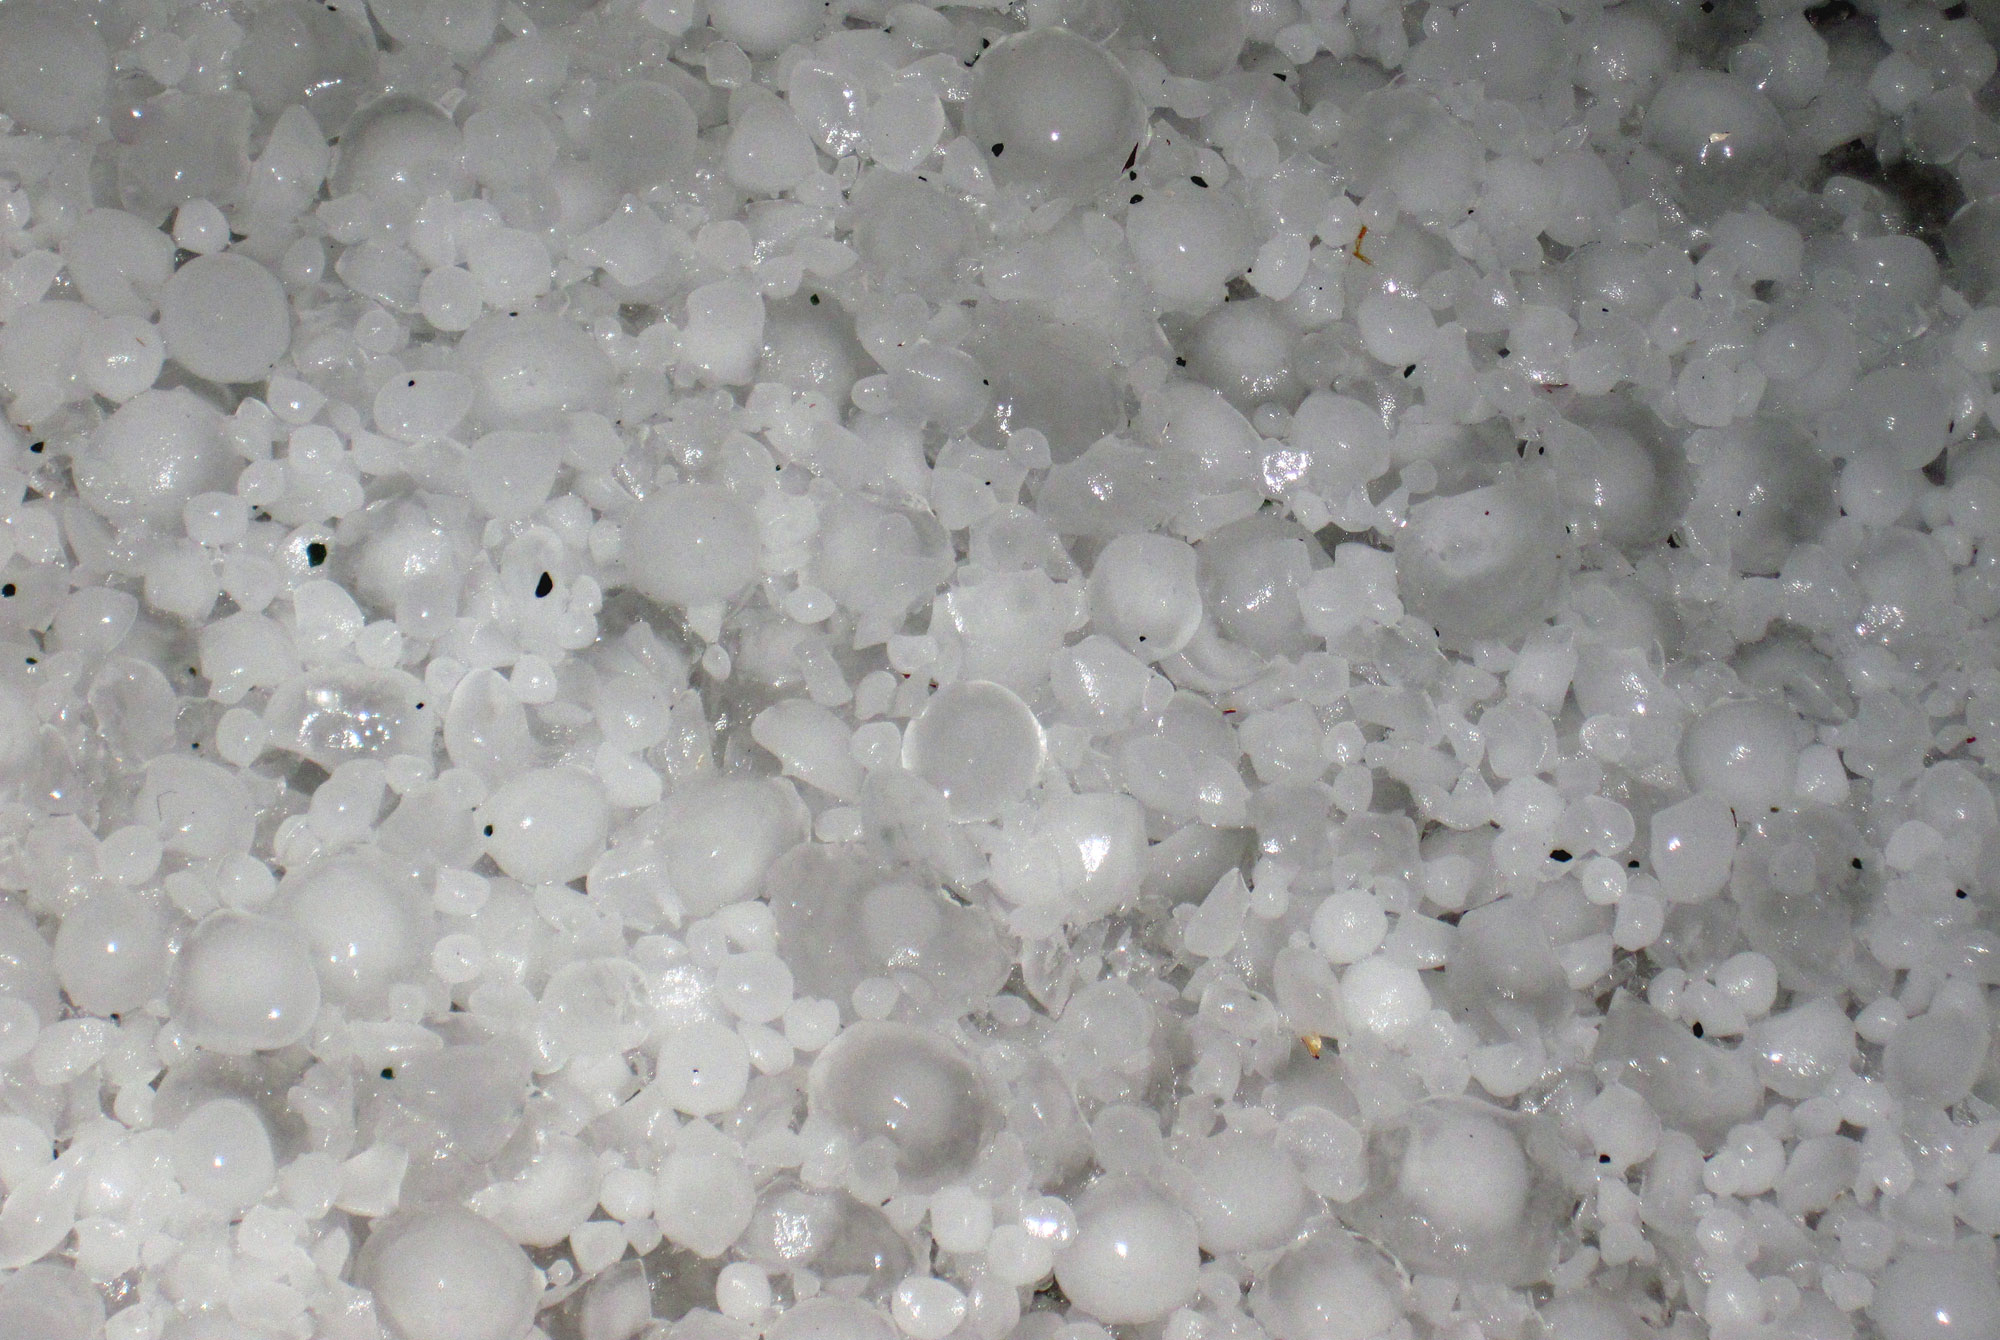 Close-up photograph of hailstones, rounded balls of ice.